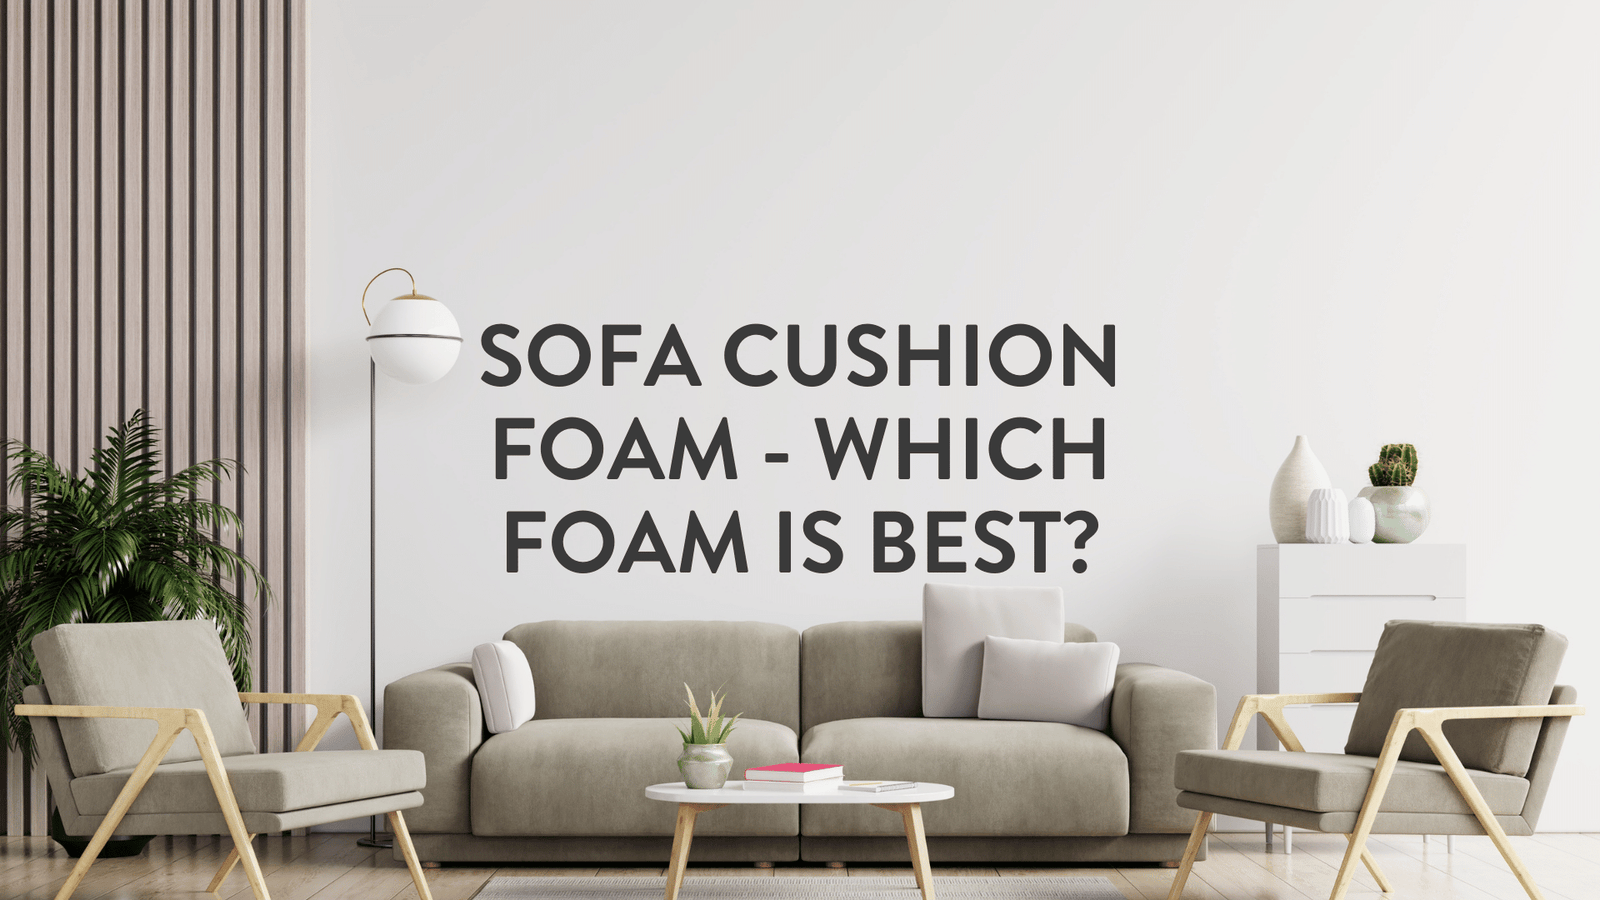 How to Replace Couch Cushion Foam